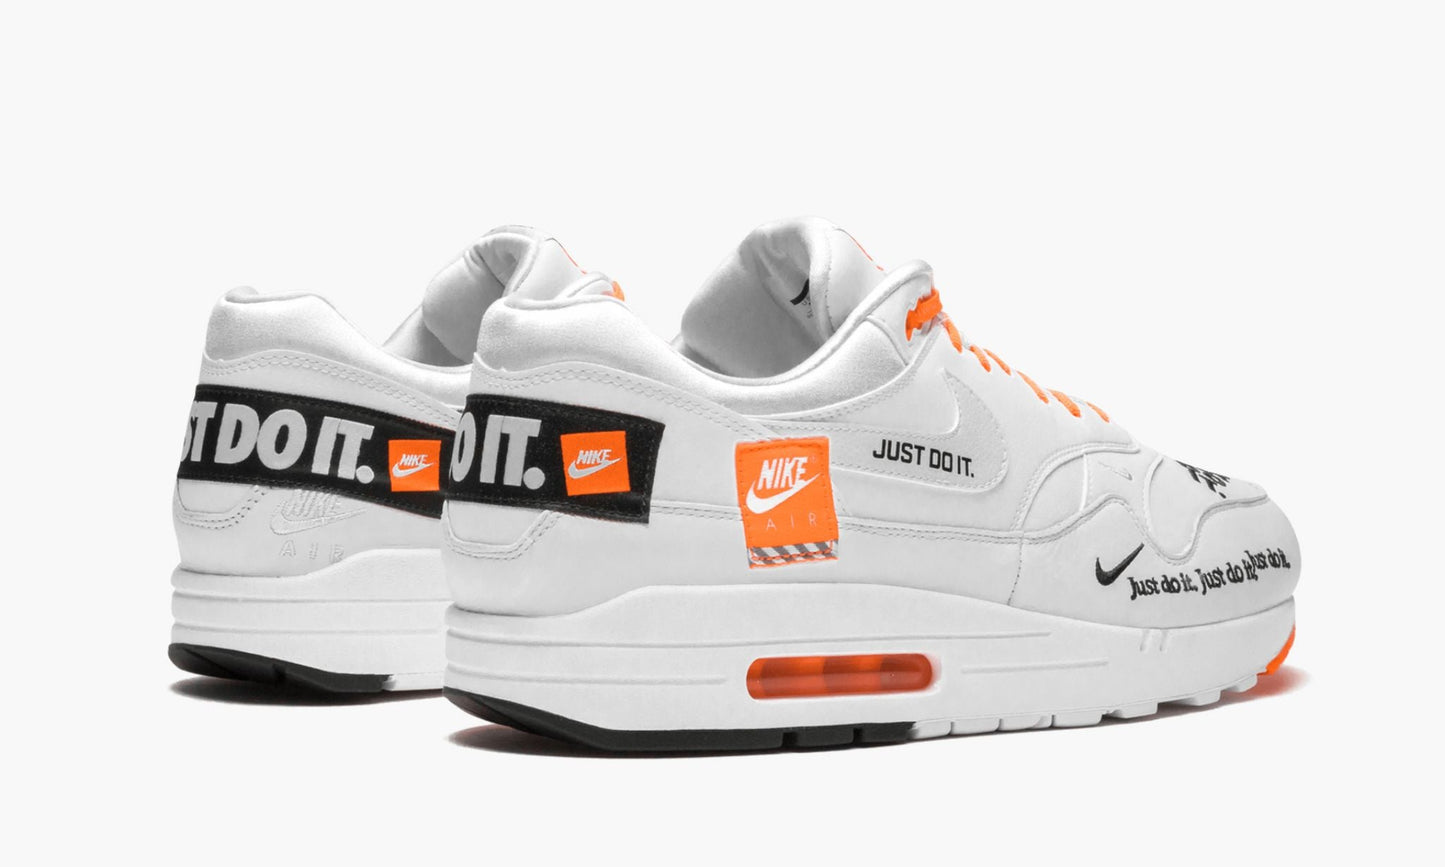 Air Max 1 SE "Just Do It"